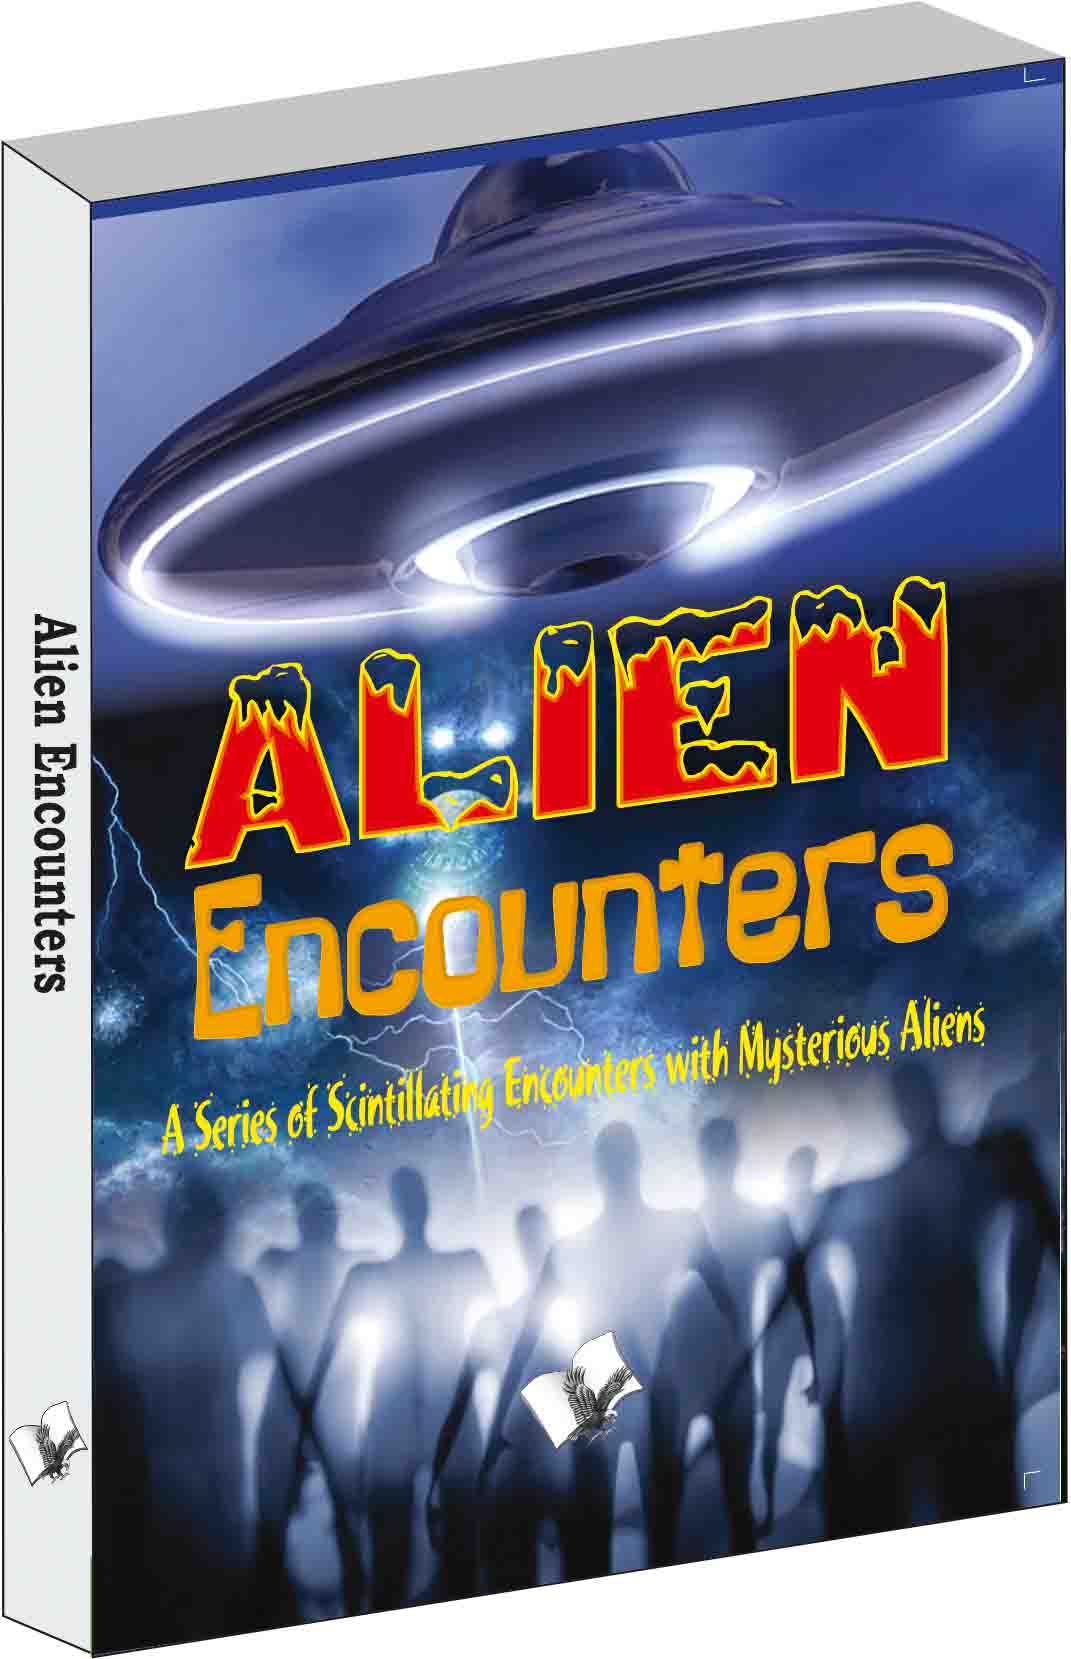 Alien Encounters-A Series of Scintillating Encounters with Mysterious Aliens